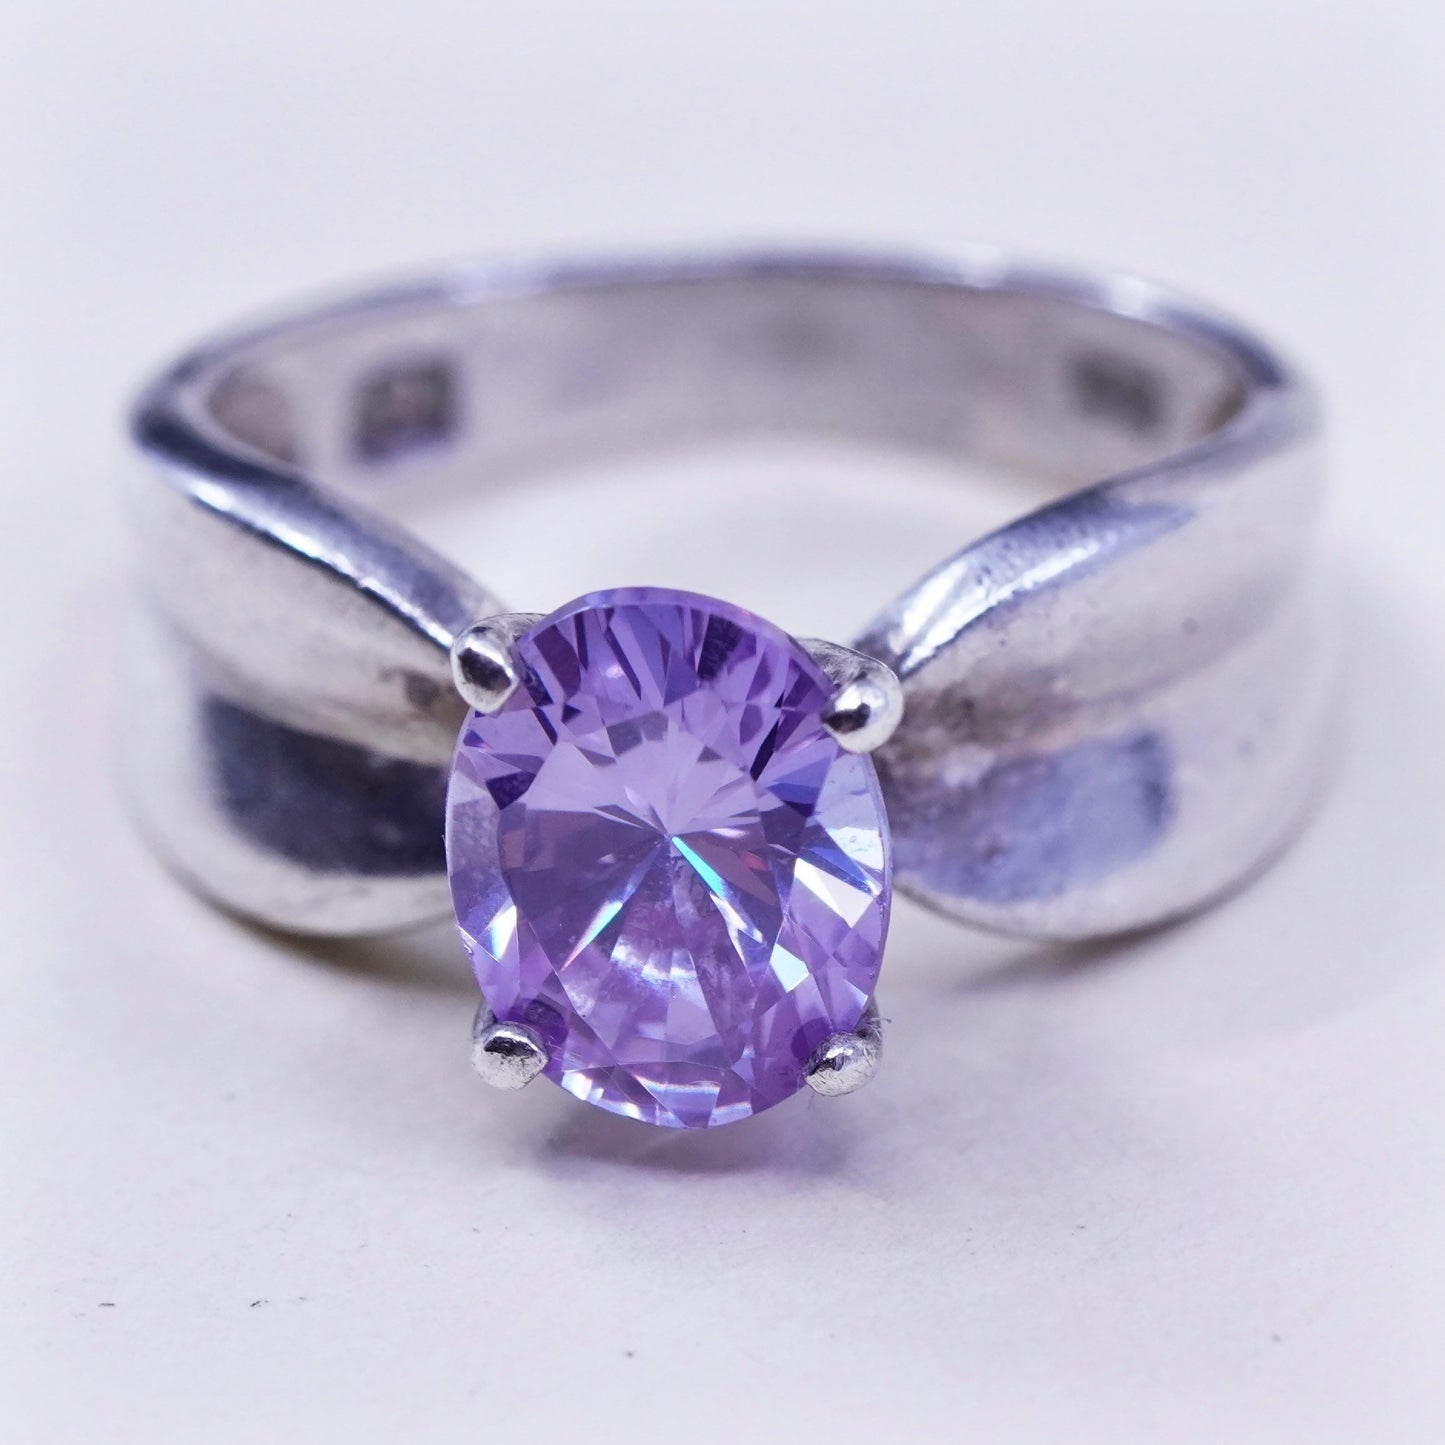 Size 6.25, vintage Sterling 925 silver handmade cocktail ring with amethyst